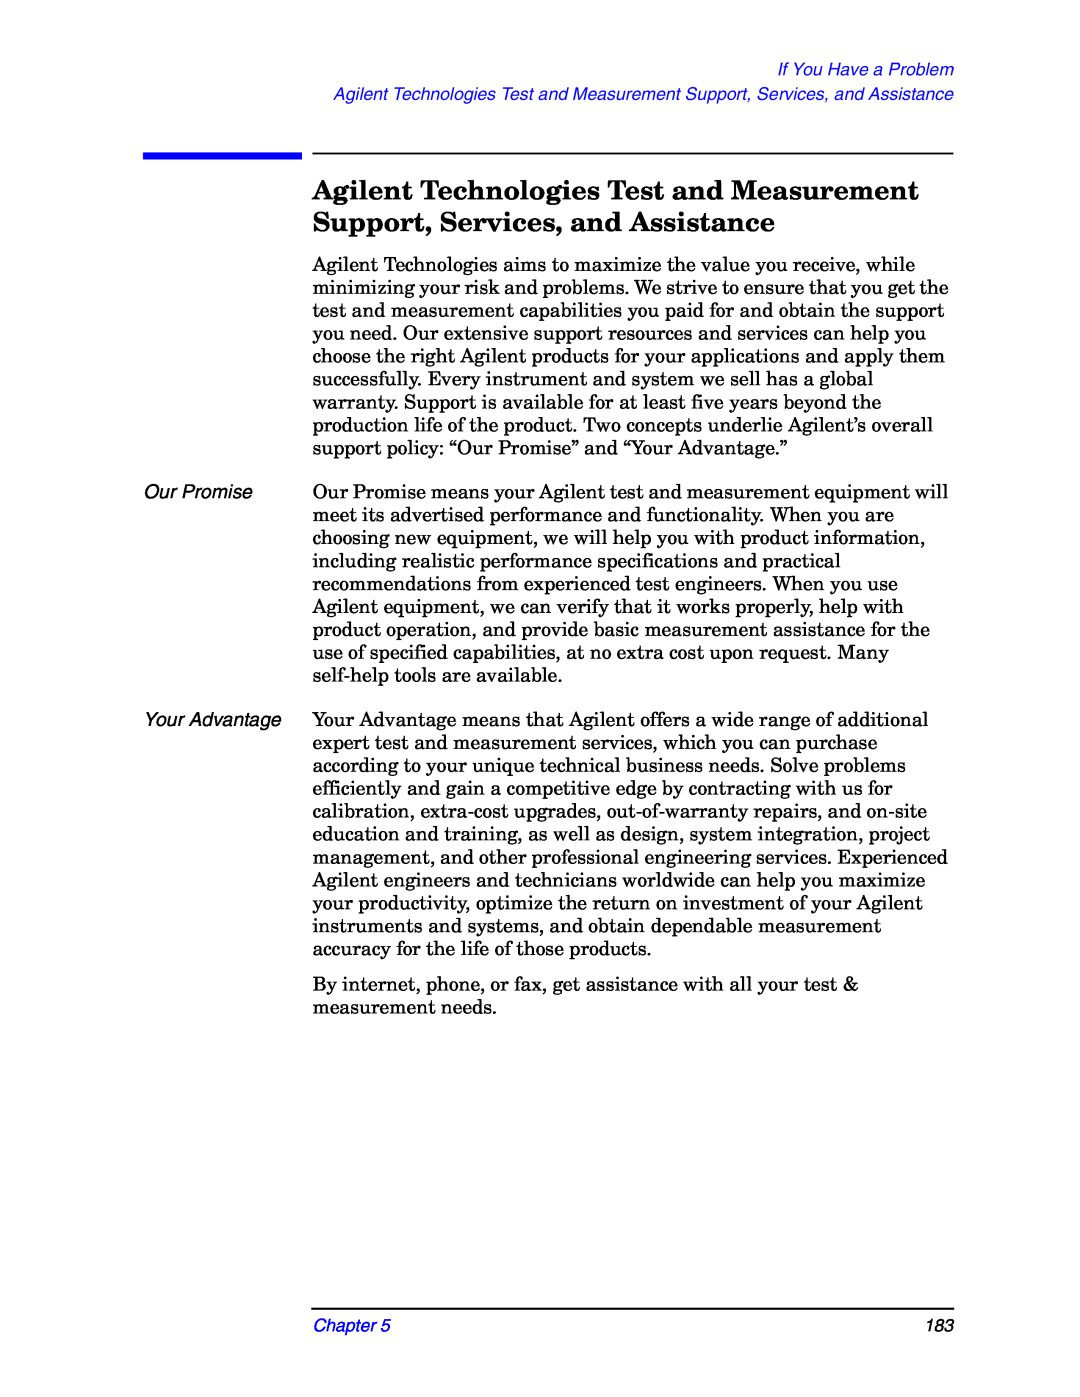 Agilent Technologies E4406A manual Agilent Technologies Test and Measurement, Support, Services, and Assistance, Chapter 